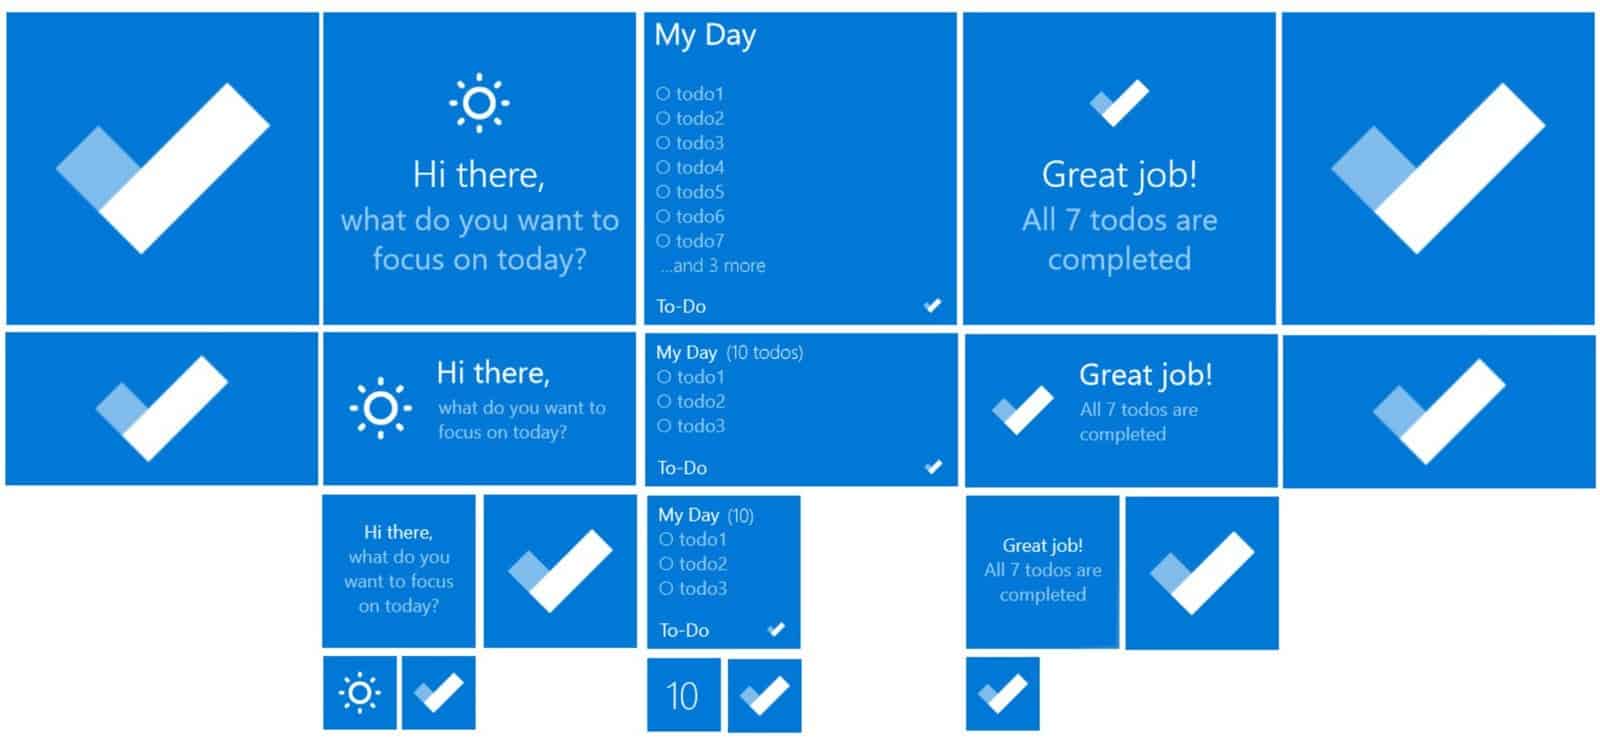 How to view Microsoft To-Do lists on the Windows 10 Start menu - OnMSFT.com - July 26, 2019